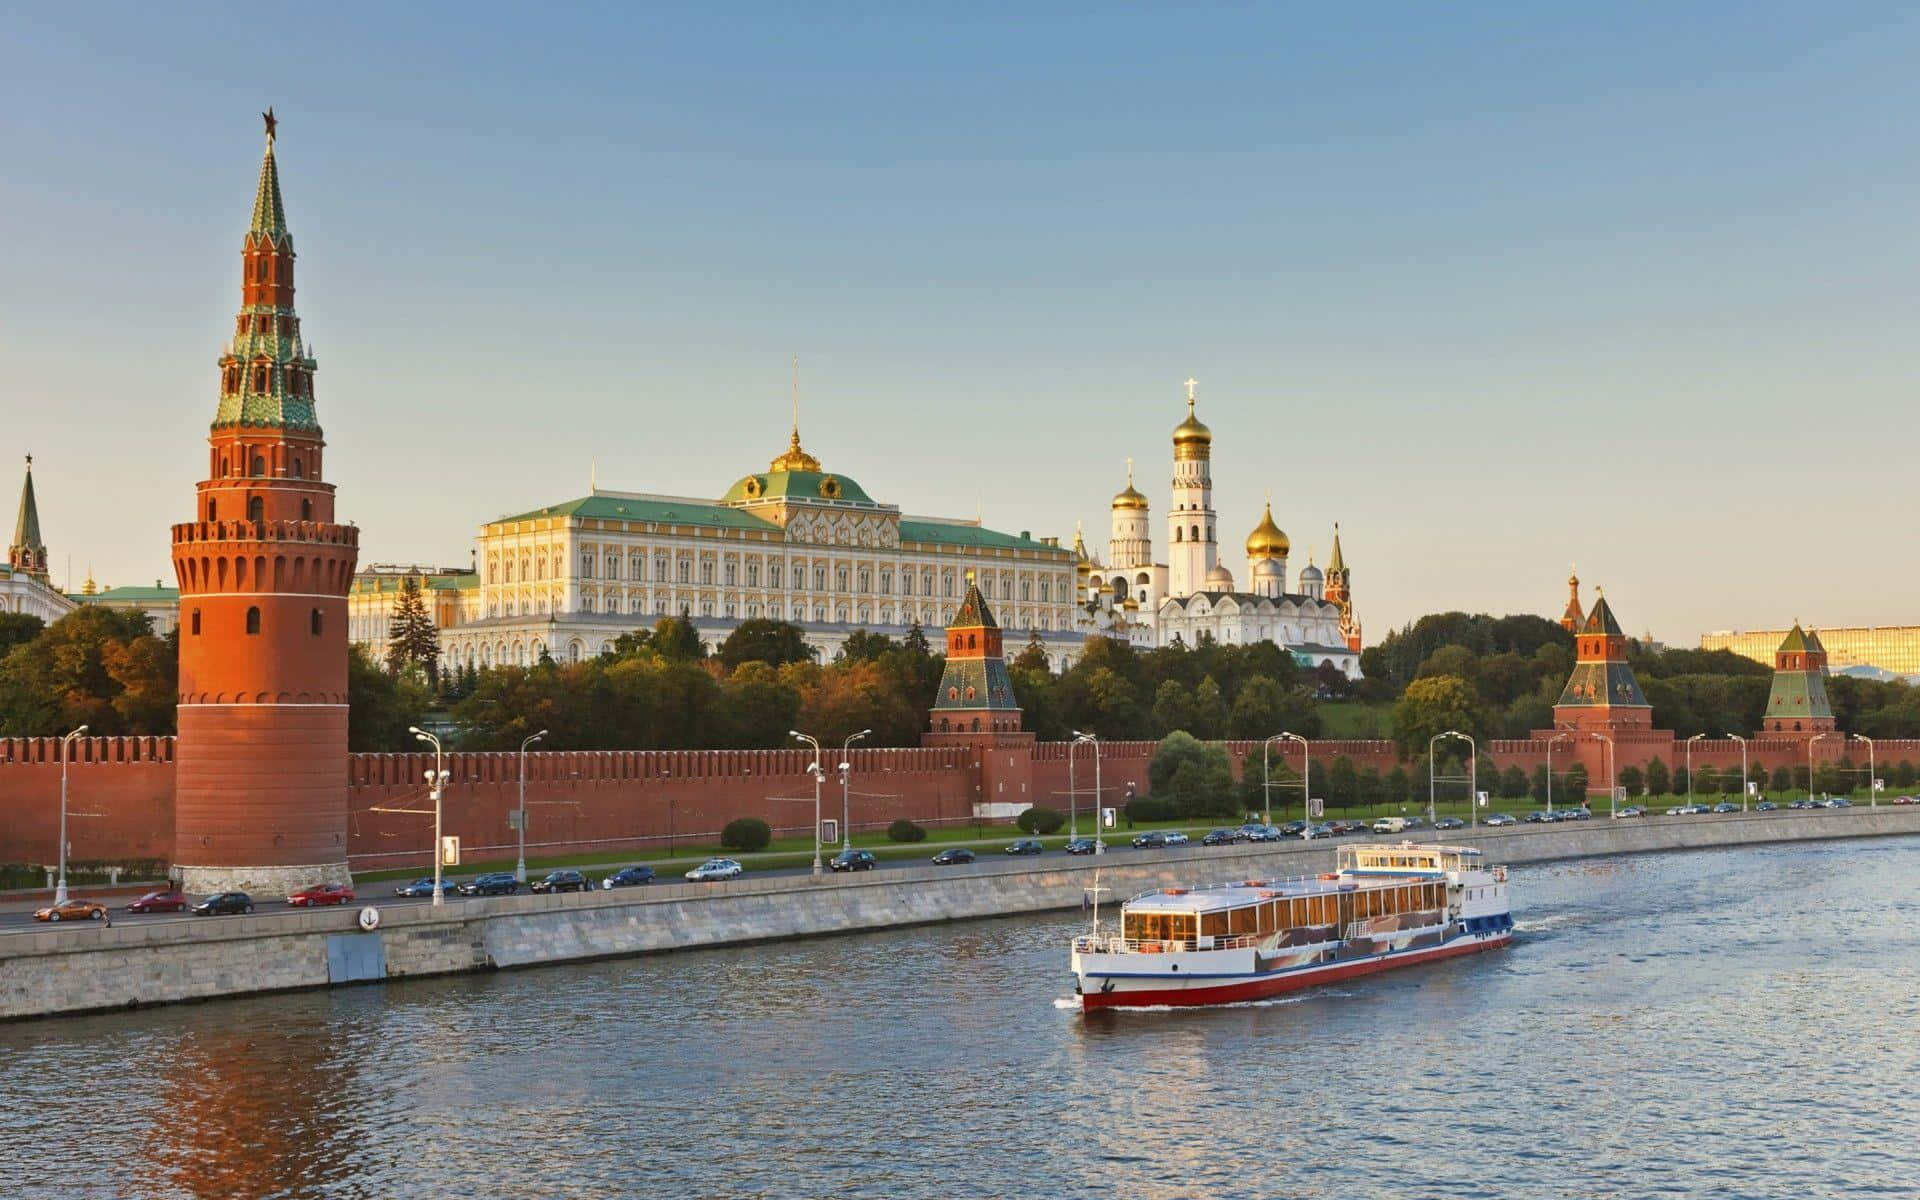 Majestic view of the Kremlin Palace amidst a serene landscape Wallpaper